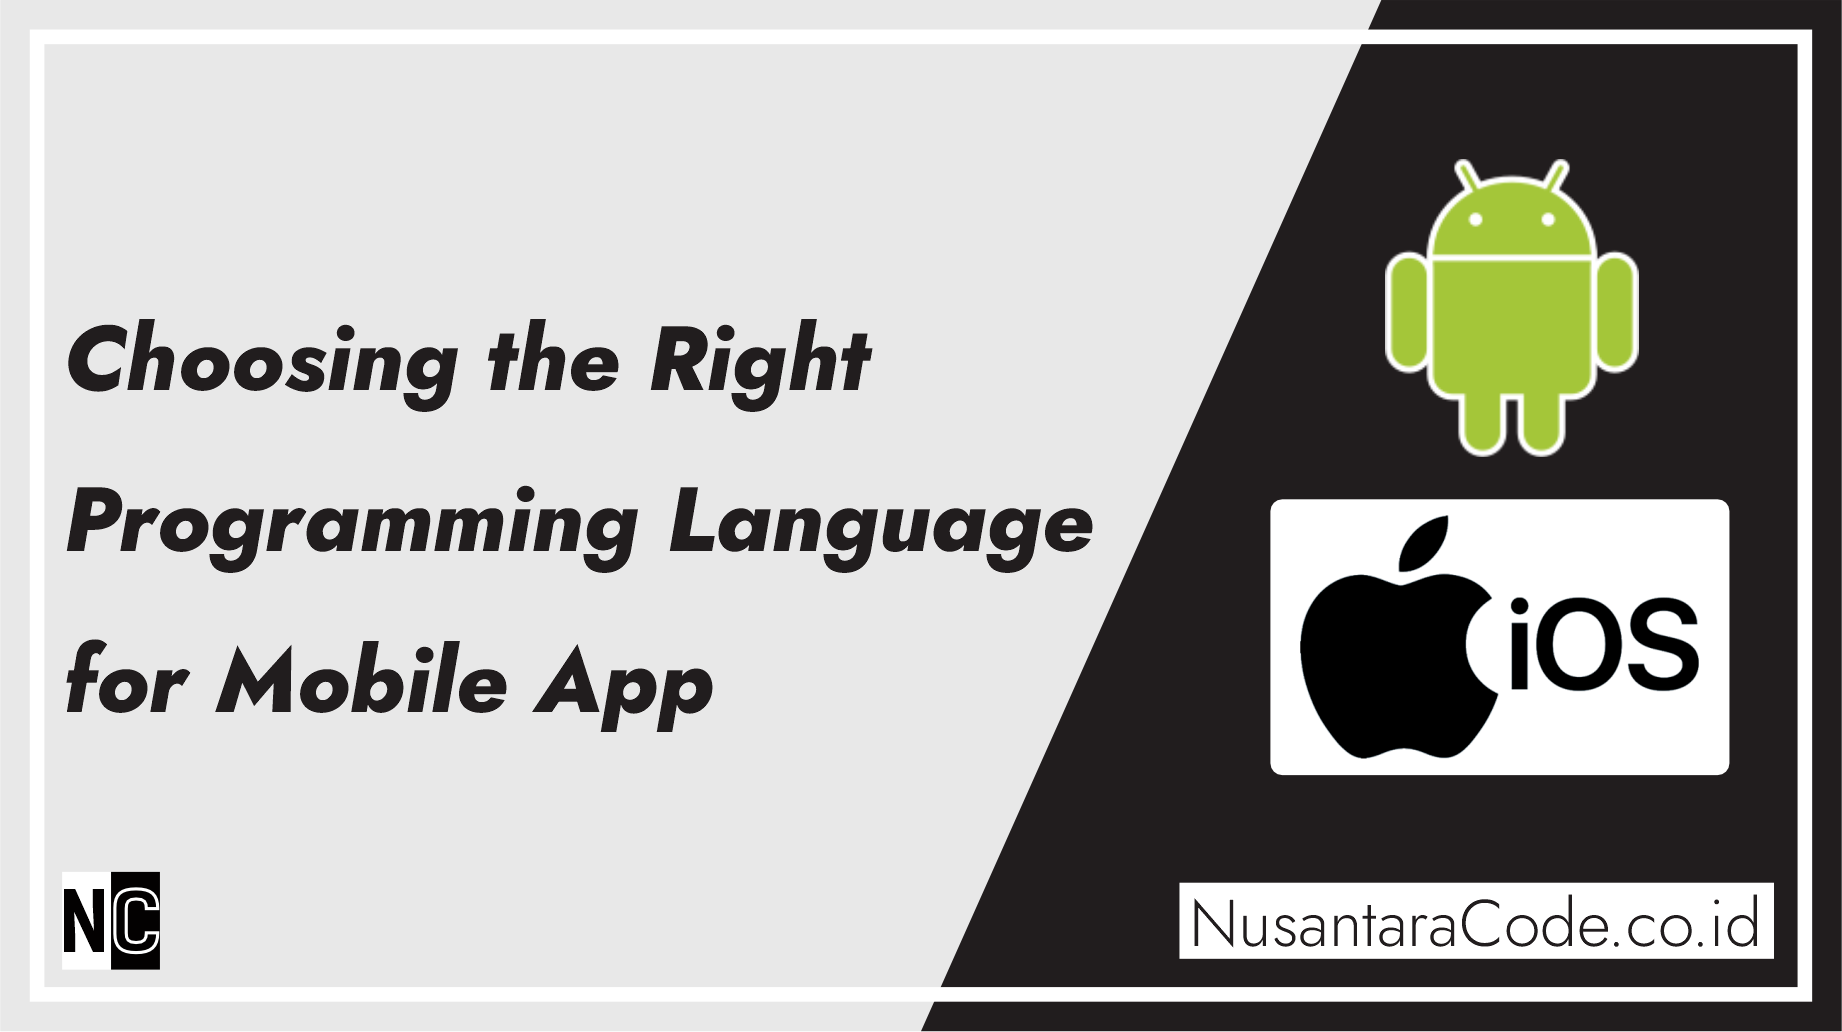 Choosing the Right Programming Language for Mobile App Development: Android vs. iOS